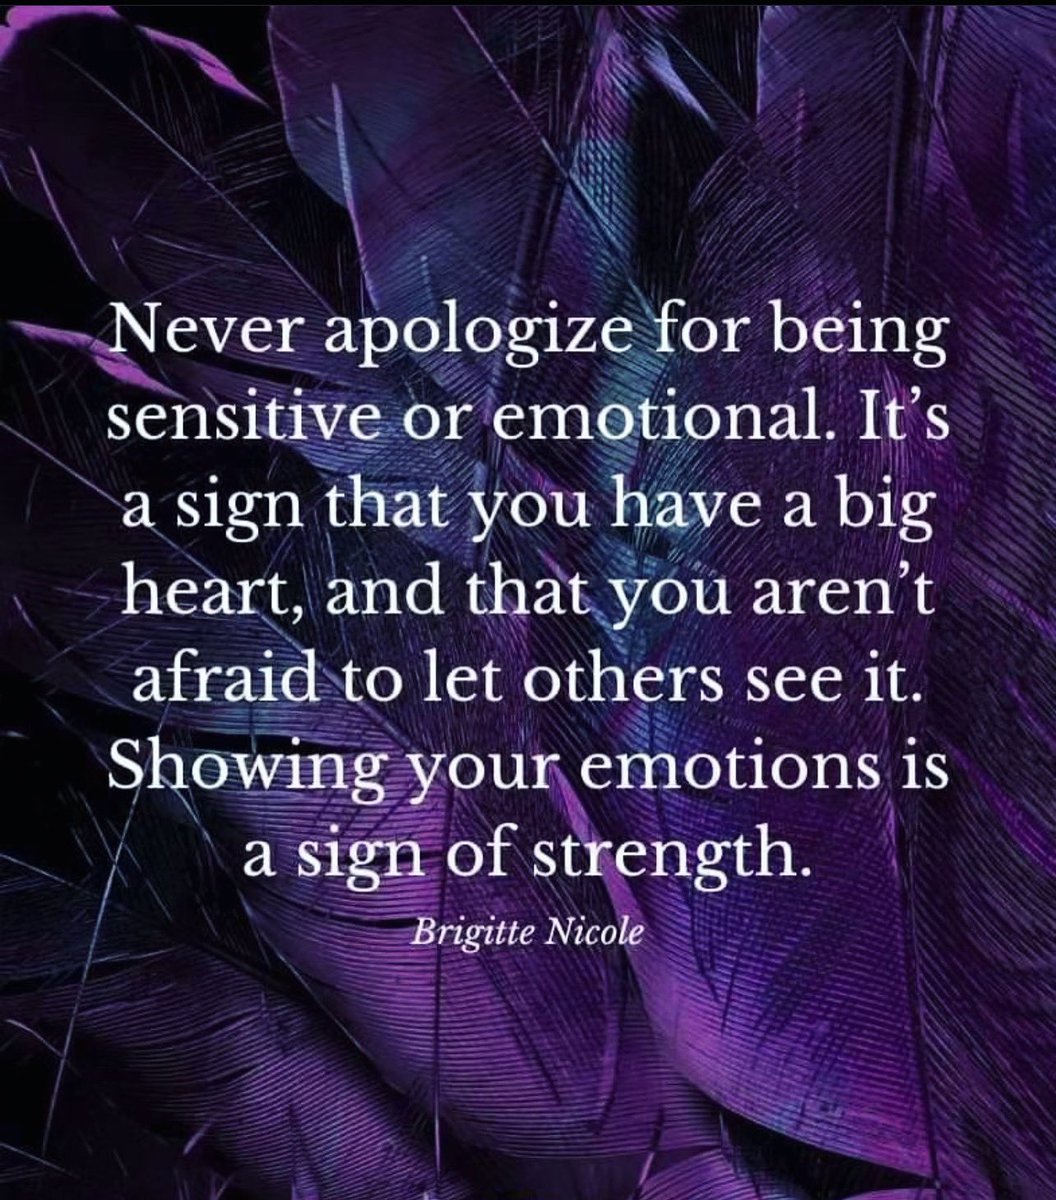 Showing your emotions is a sign of #Strength … 
— #BrigitteNicole …. 
🦋🔥💪🏾🌱
#StrengthFromStruggle #TheFutureLooksBright #KeepGrowing #Growth #KeepStackingSmallWins #WorkInProgress #EmbraceTheJourney #OwnYourLife